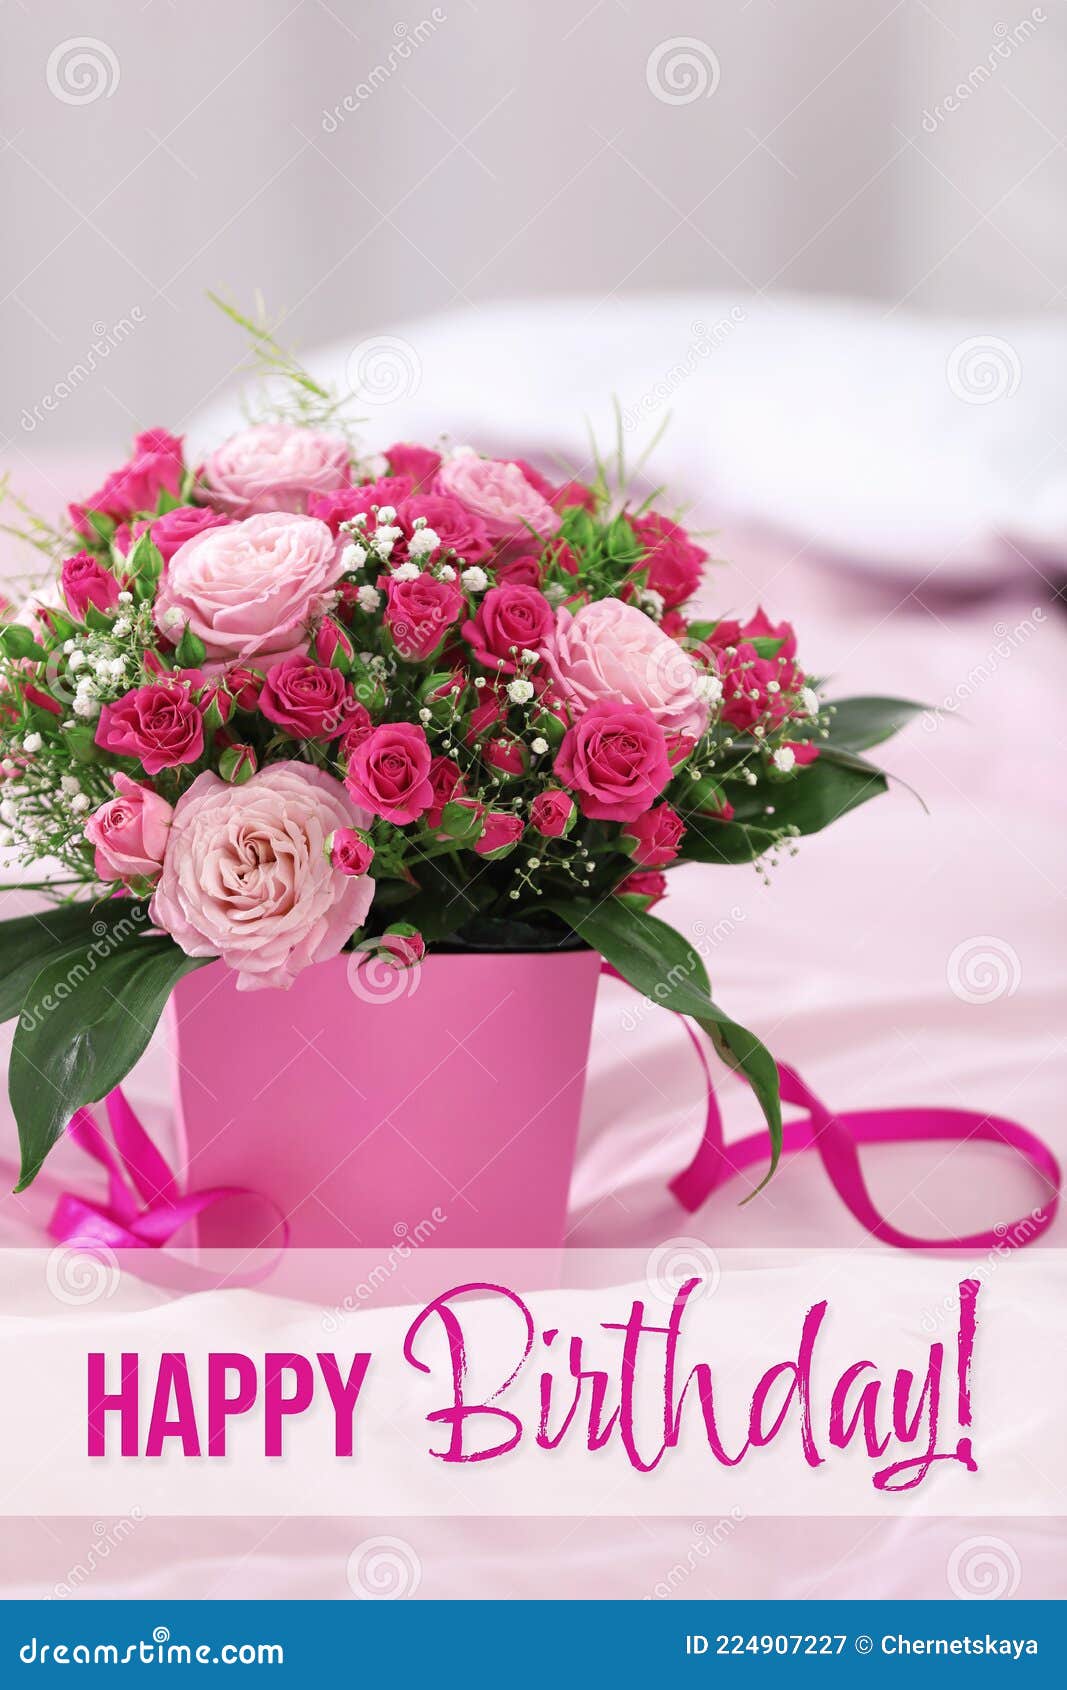 Amazing Collection of Full 4K Happy Birthday Flowers Images - Over 999 ...